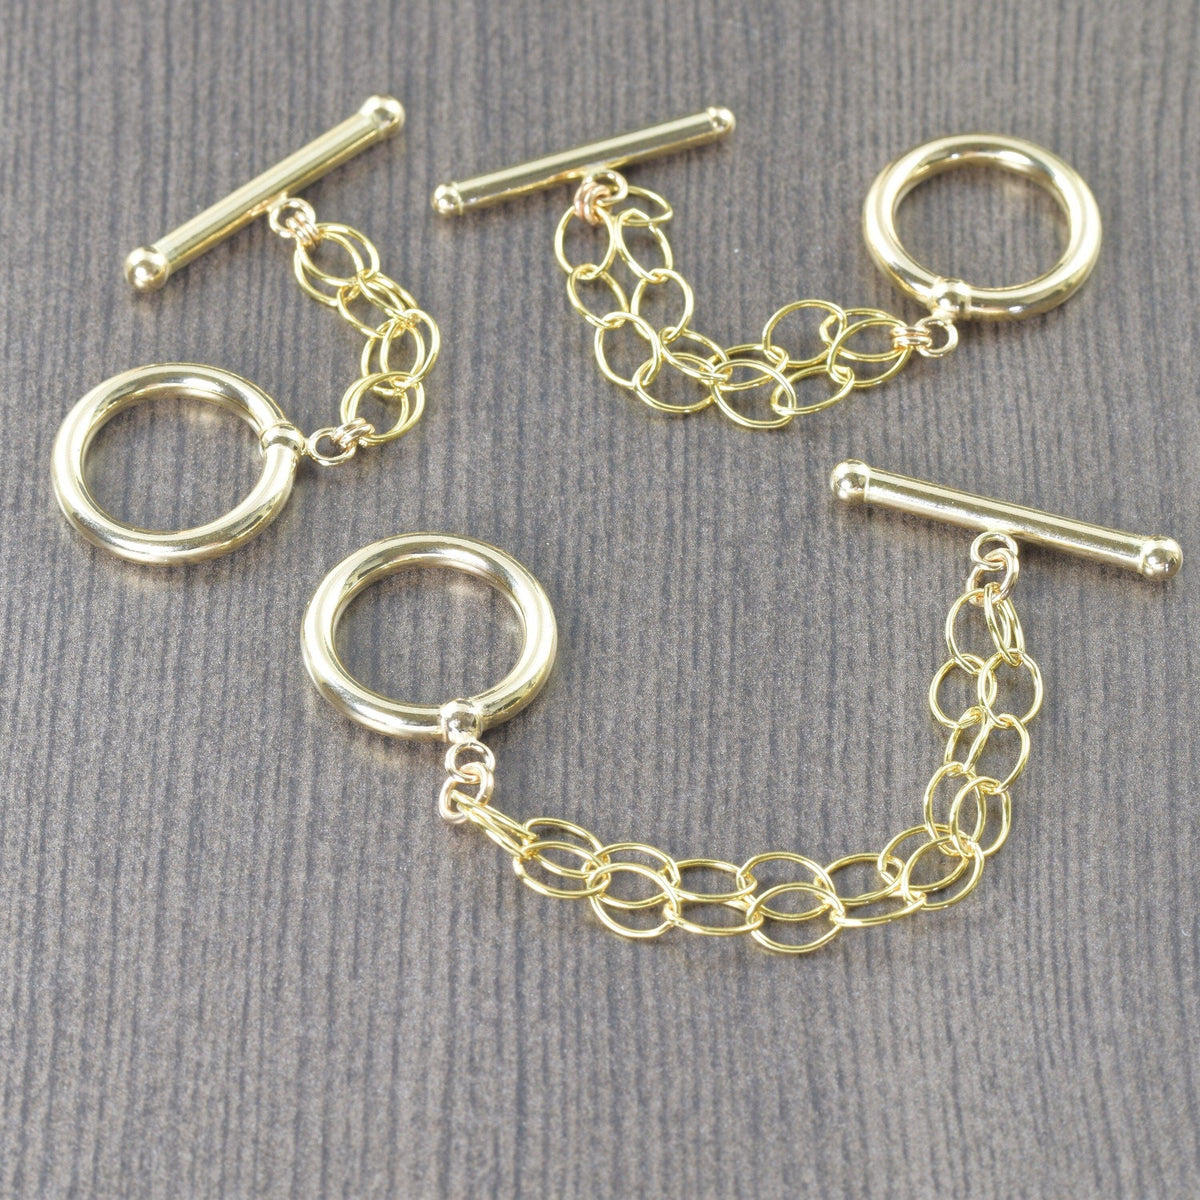 How to Make an Adjustable Necklace Extender - Rings and